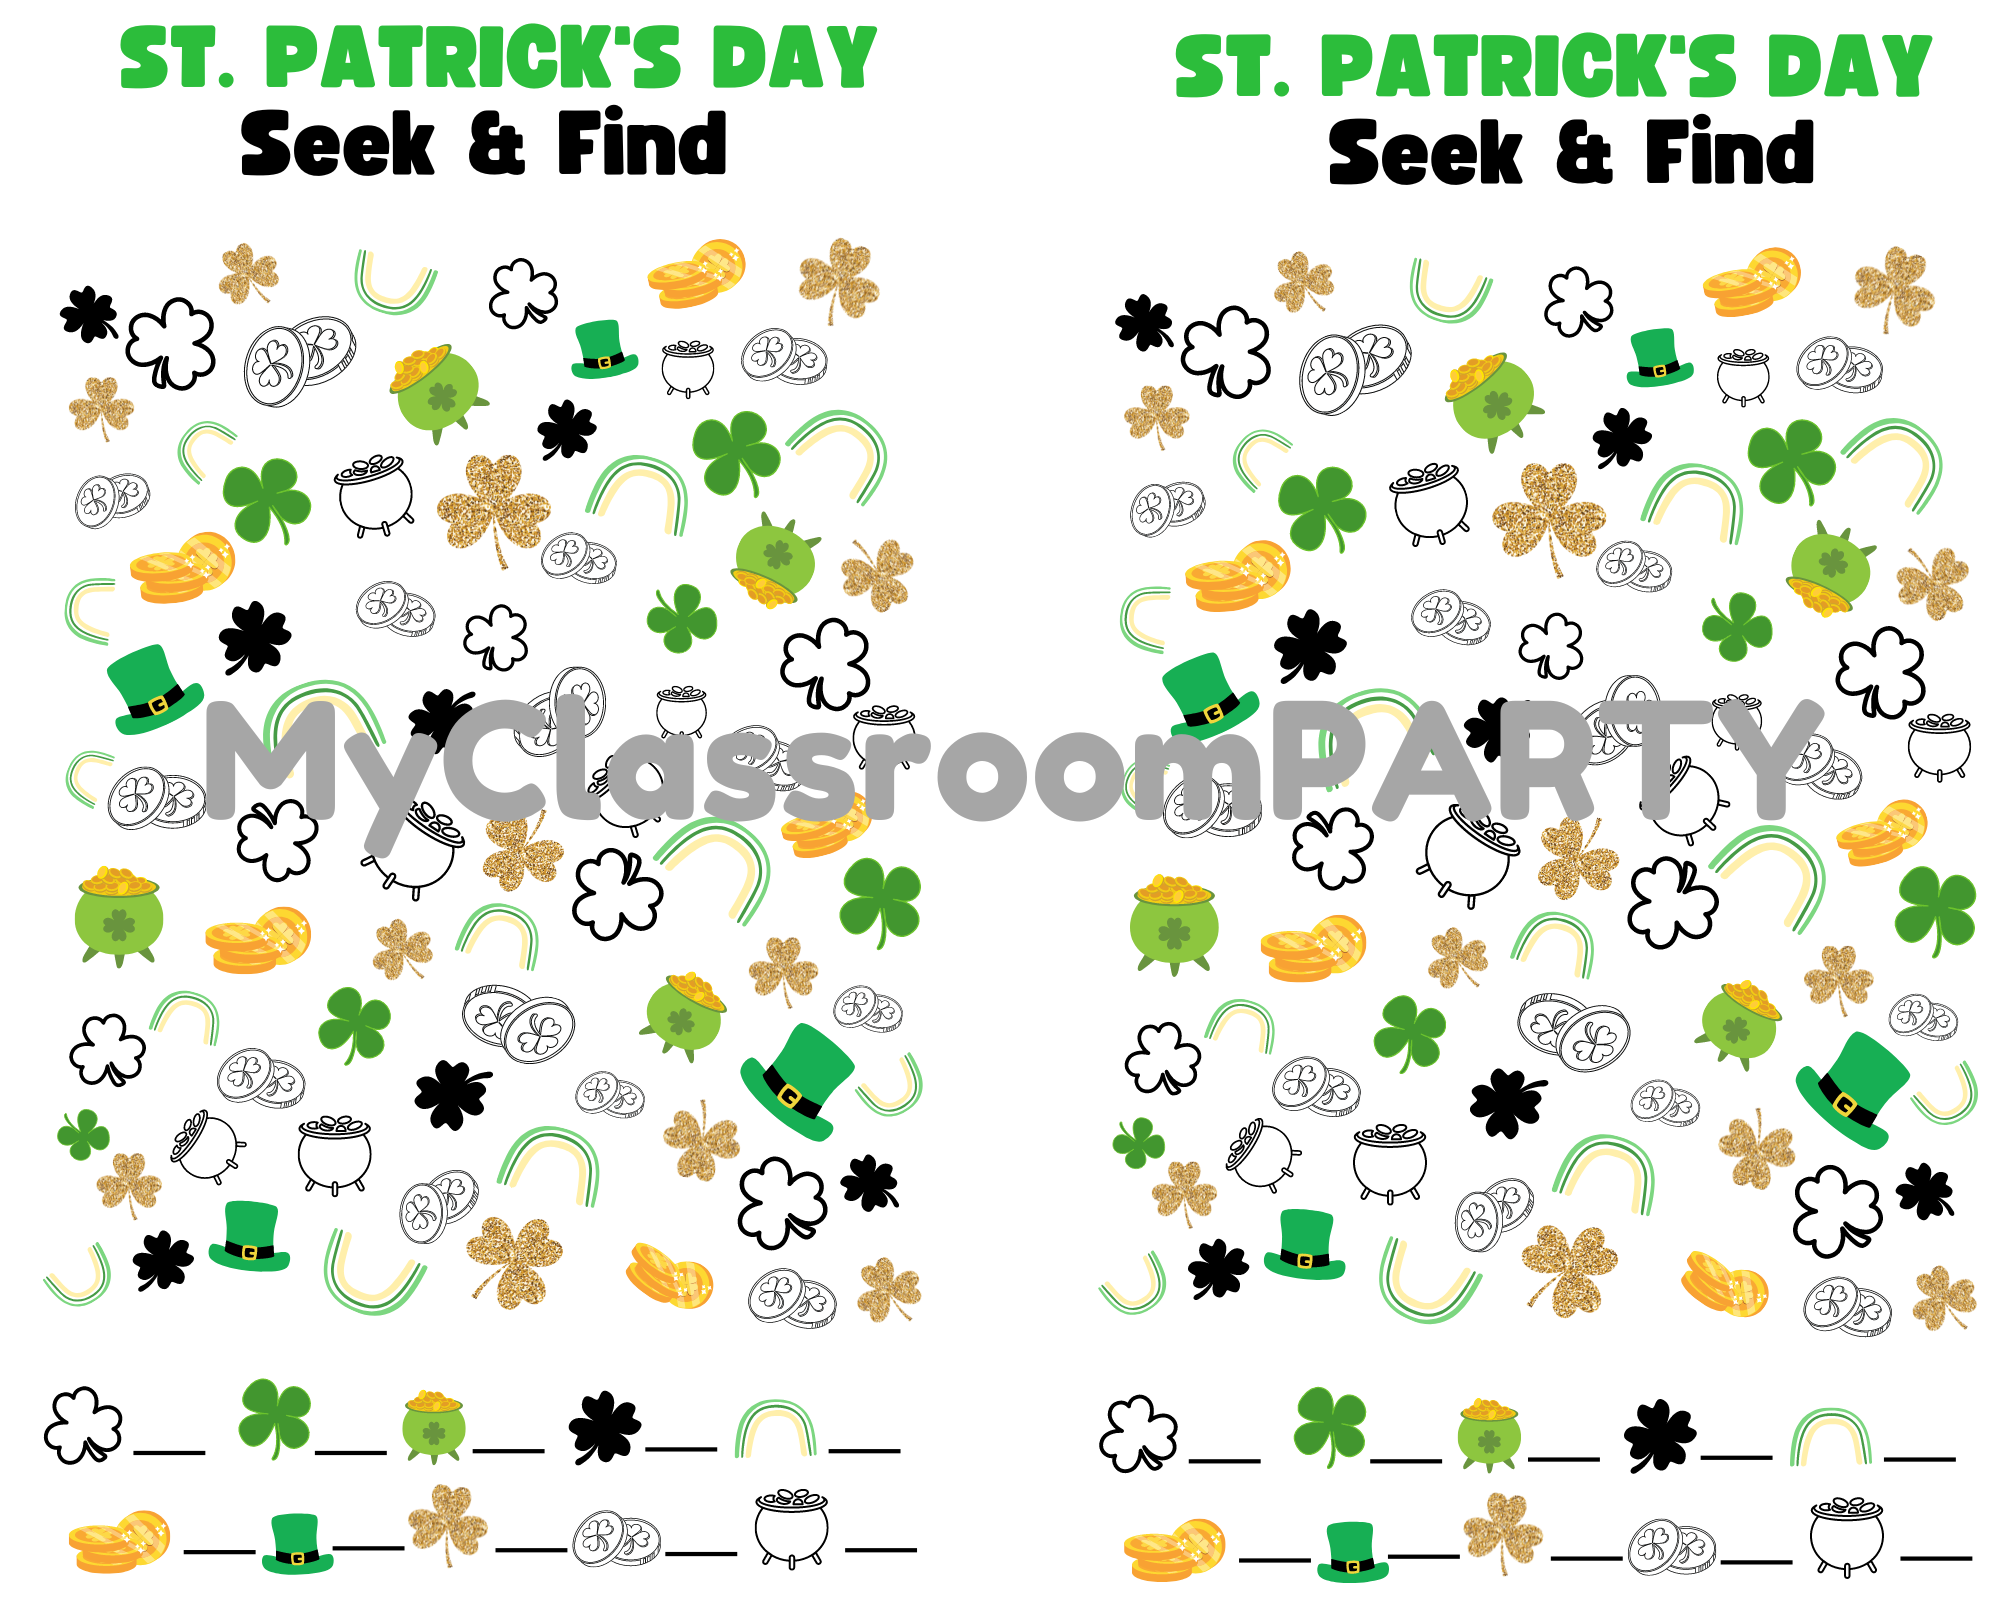 This St. Patrick's Day printable is perfect for a classroom activity.  It would also be a great addition to a school St. Patrick's Day party. 